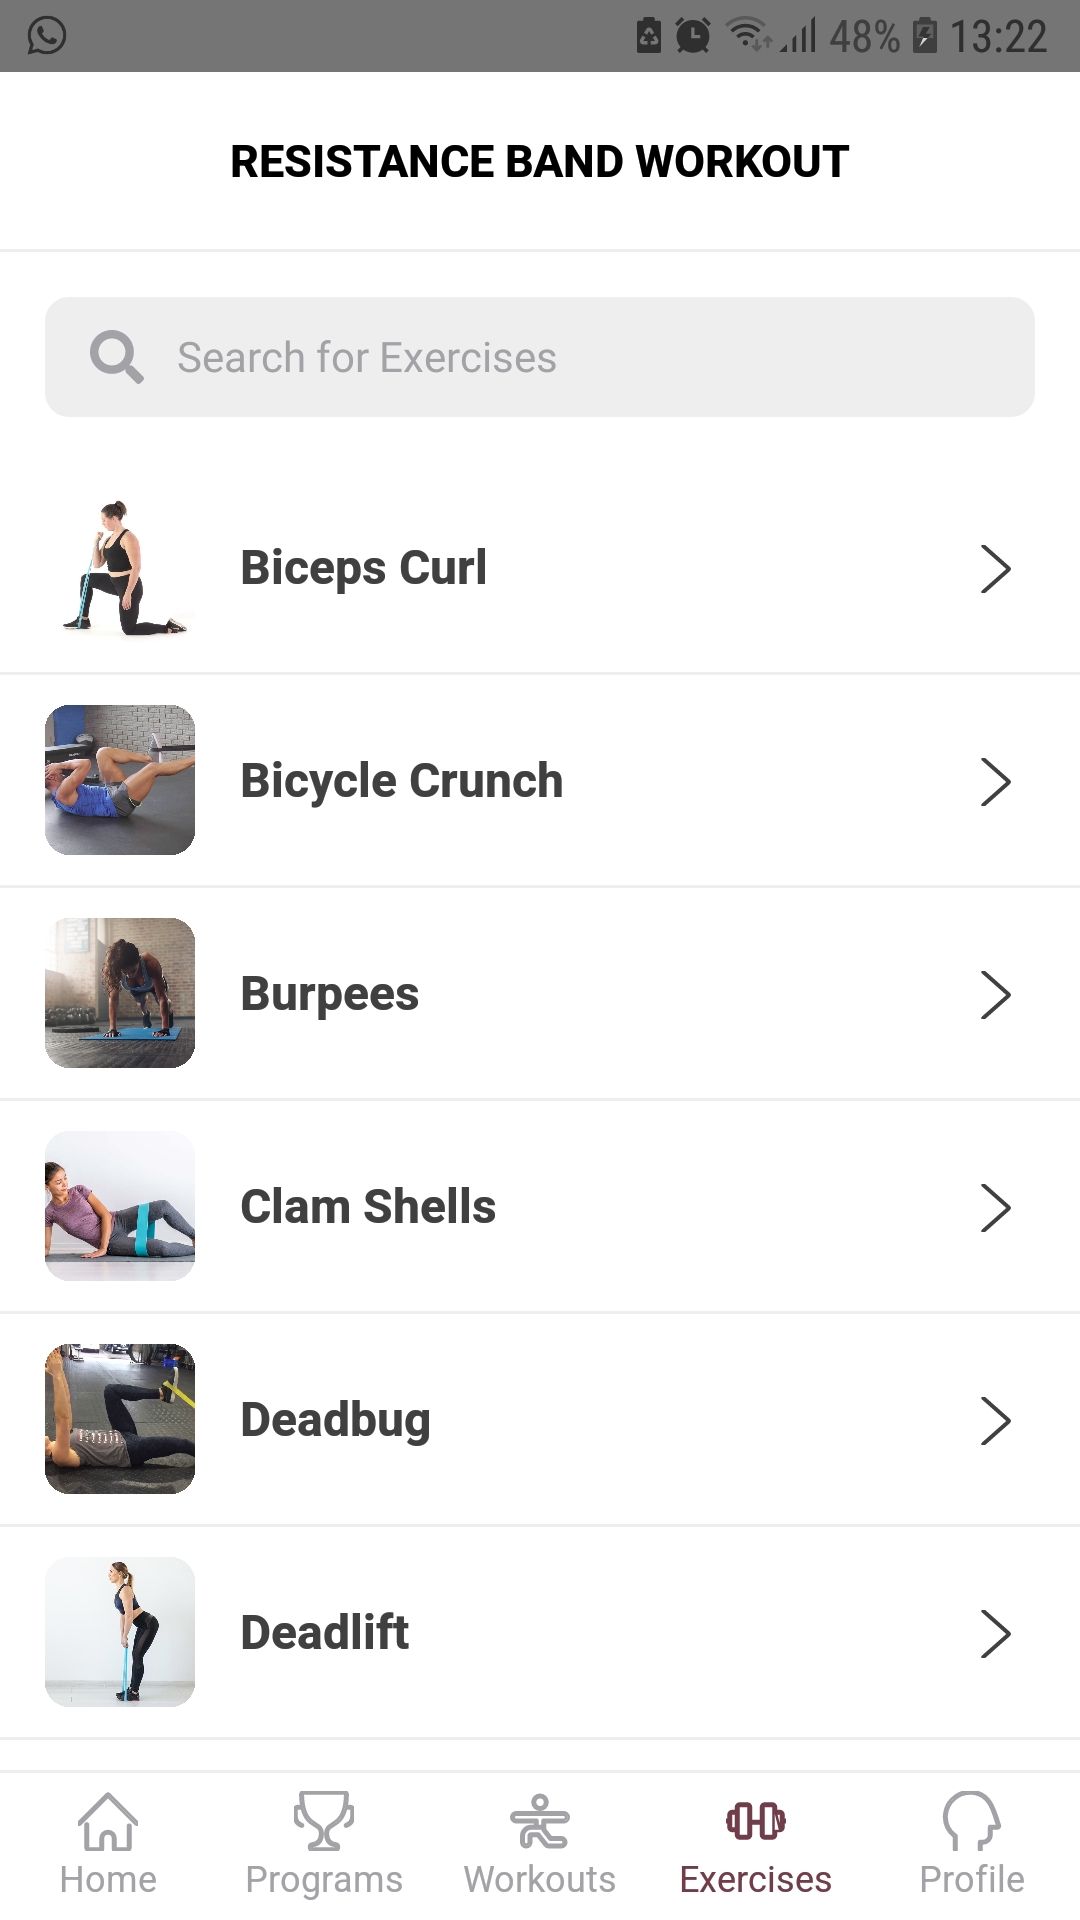 Resistance Band Workout mobile workout app exercises list